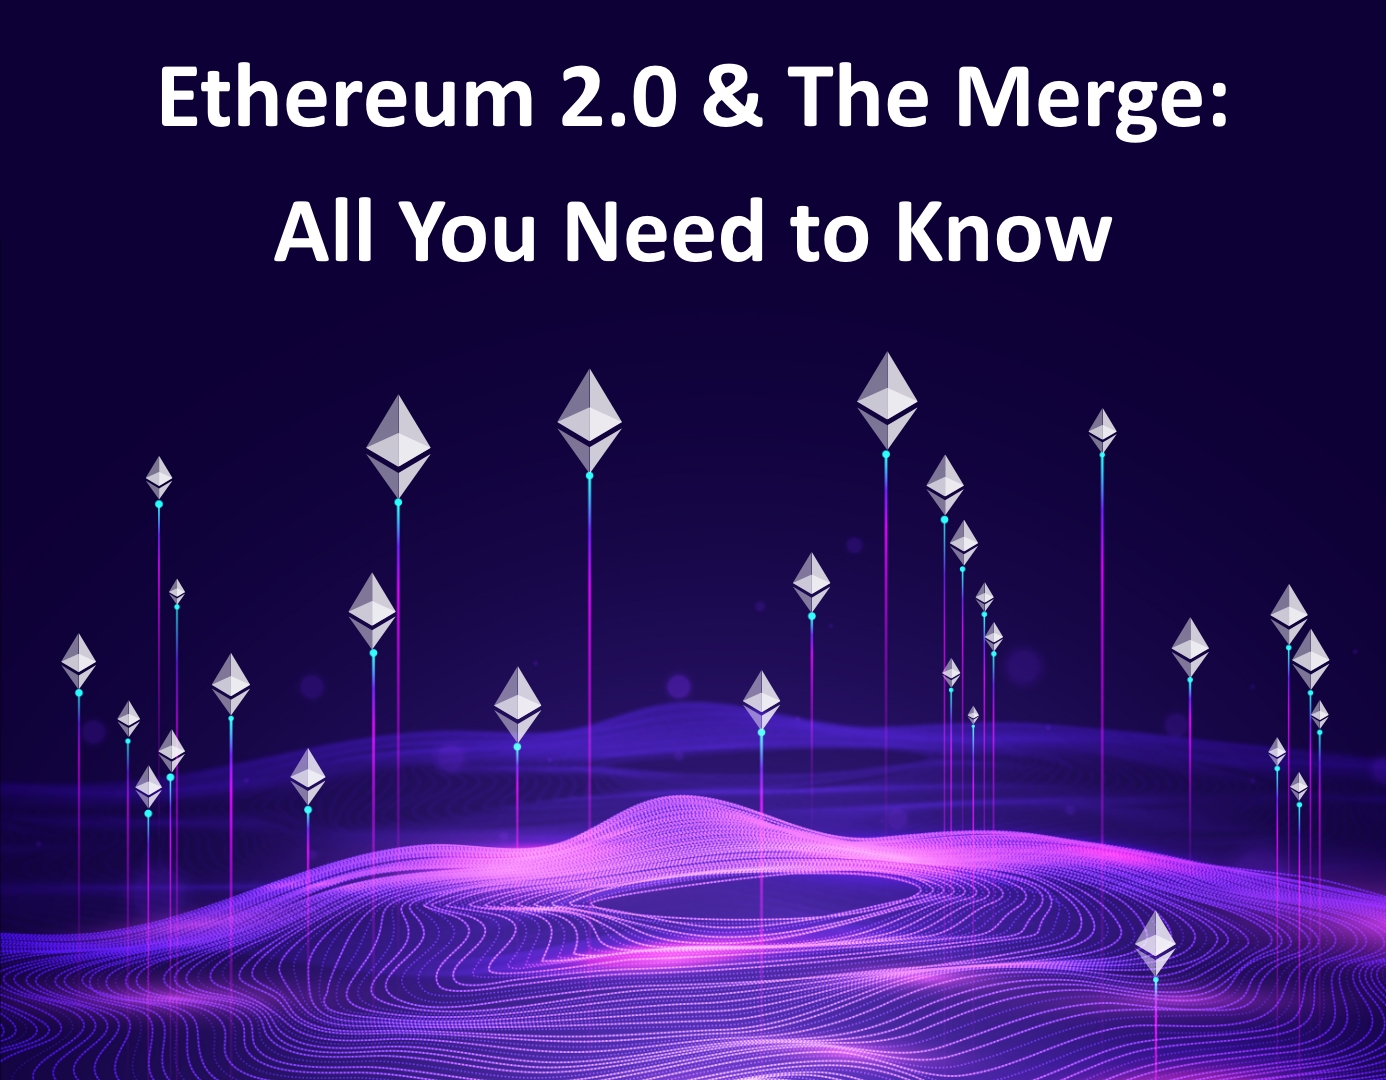 Cover image for the blog post about Ethereum 2.0 upgrade, featuring energy efficiency, scalability, and enhanced security through Proof-of-Stake and Sharding mechanisms.